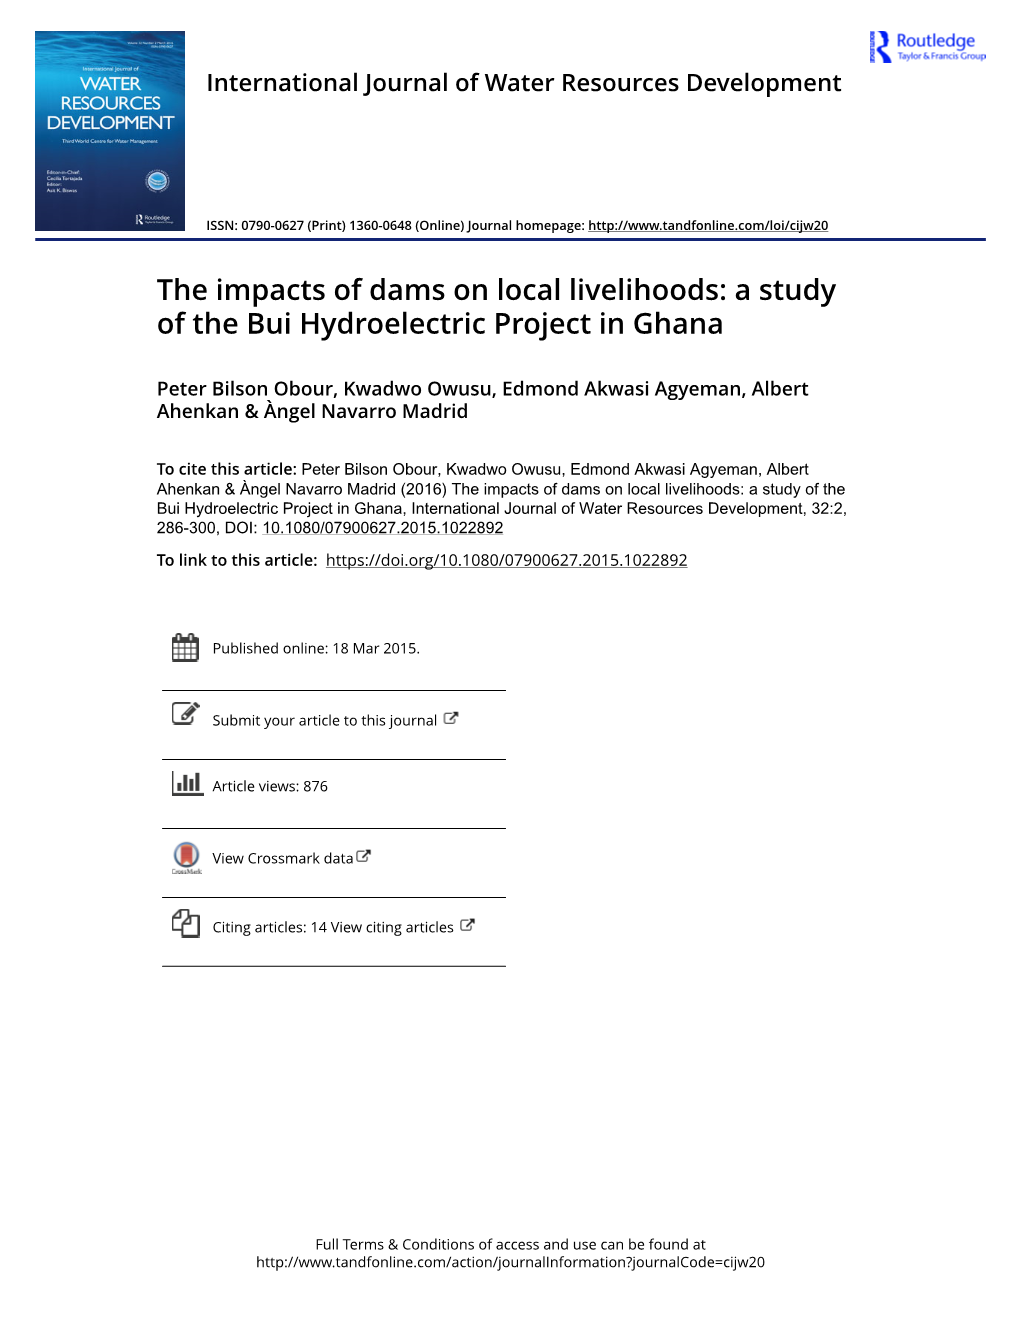 The Impacts of Dams on Local Livelihoods: a Study of the Bui Hydroelectric Project in Ghana